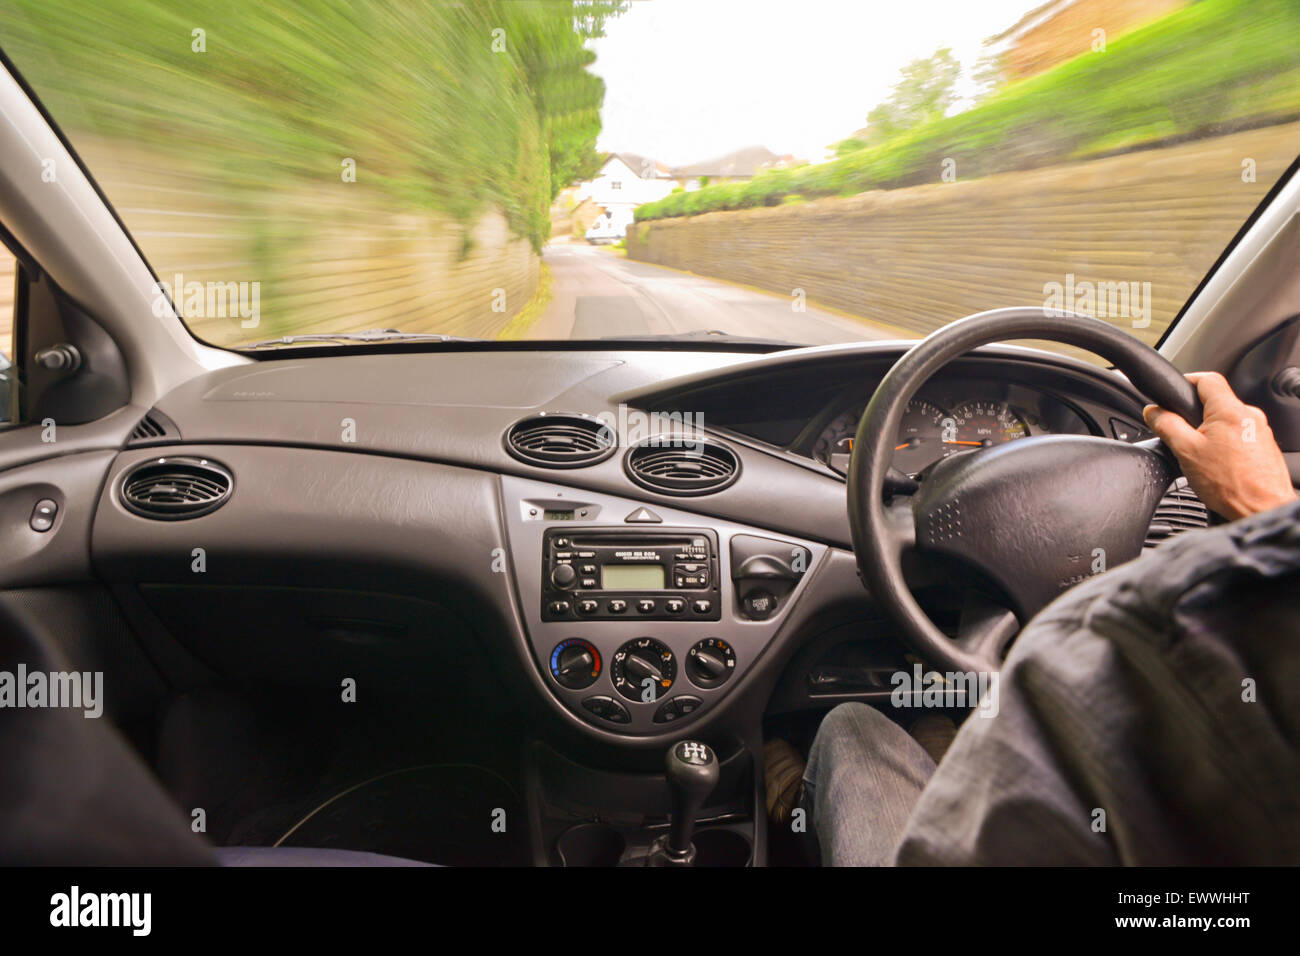 motion blur of rural road from interior of car Stock Photo